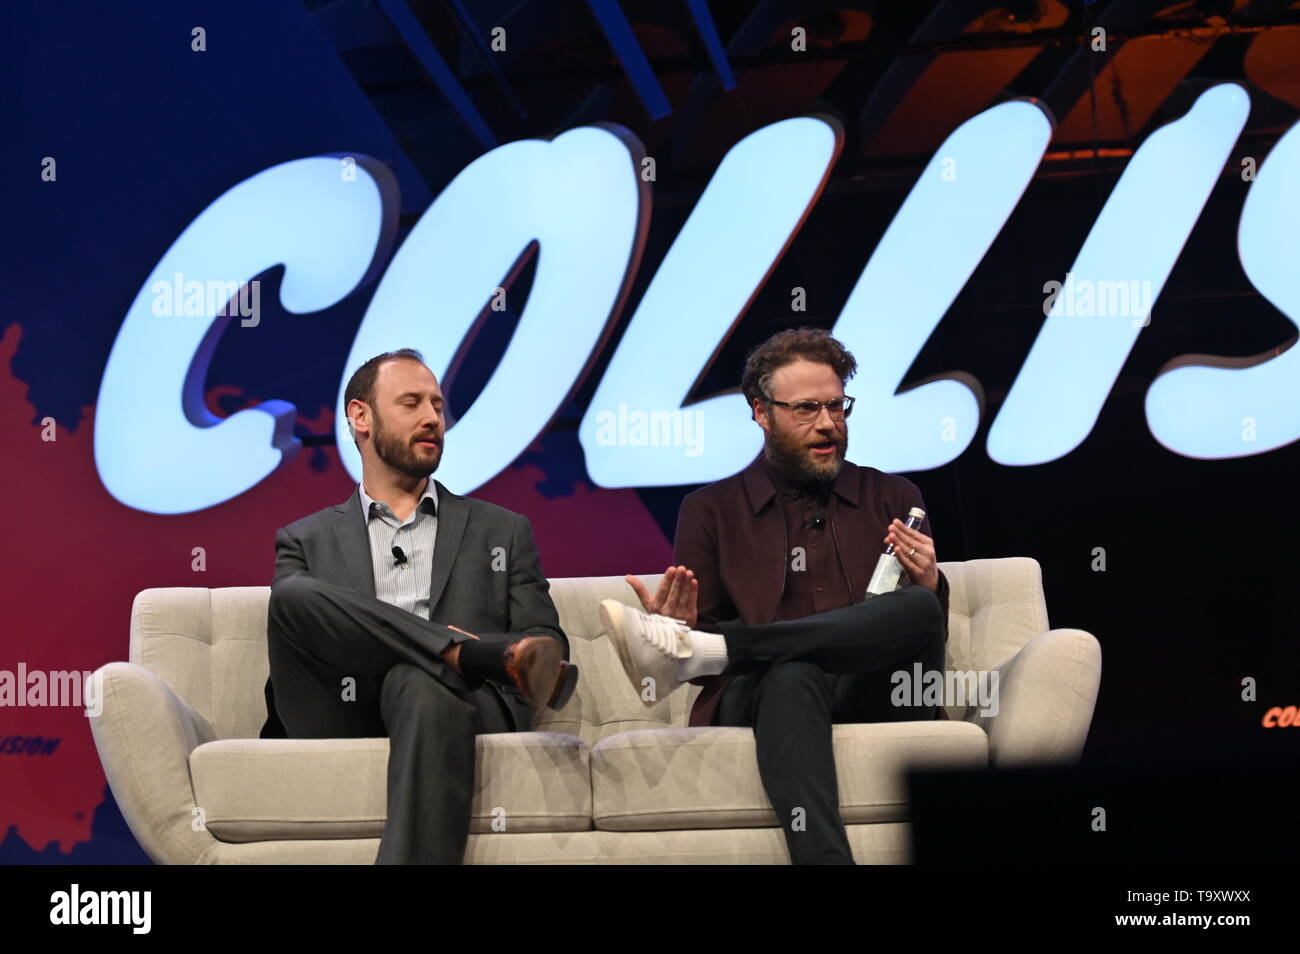 Collision 2019 - Opening Night Toronto , Canada - 20 May 2019; Seth Rogen, Co-founder, Houseplanton, centre, waves to the crowd with Evan Goldberg, Canadian screenwriter, and Karan Wadhera, Managing Partner, Casa Verde Capital, right, on centre stage during the opening night of Collision 2019 at Enercare Center in Toronto, Canada. Stock Photo